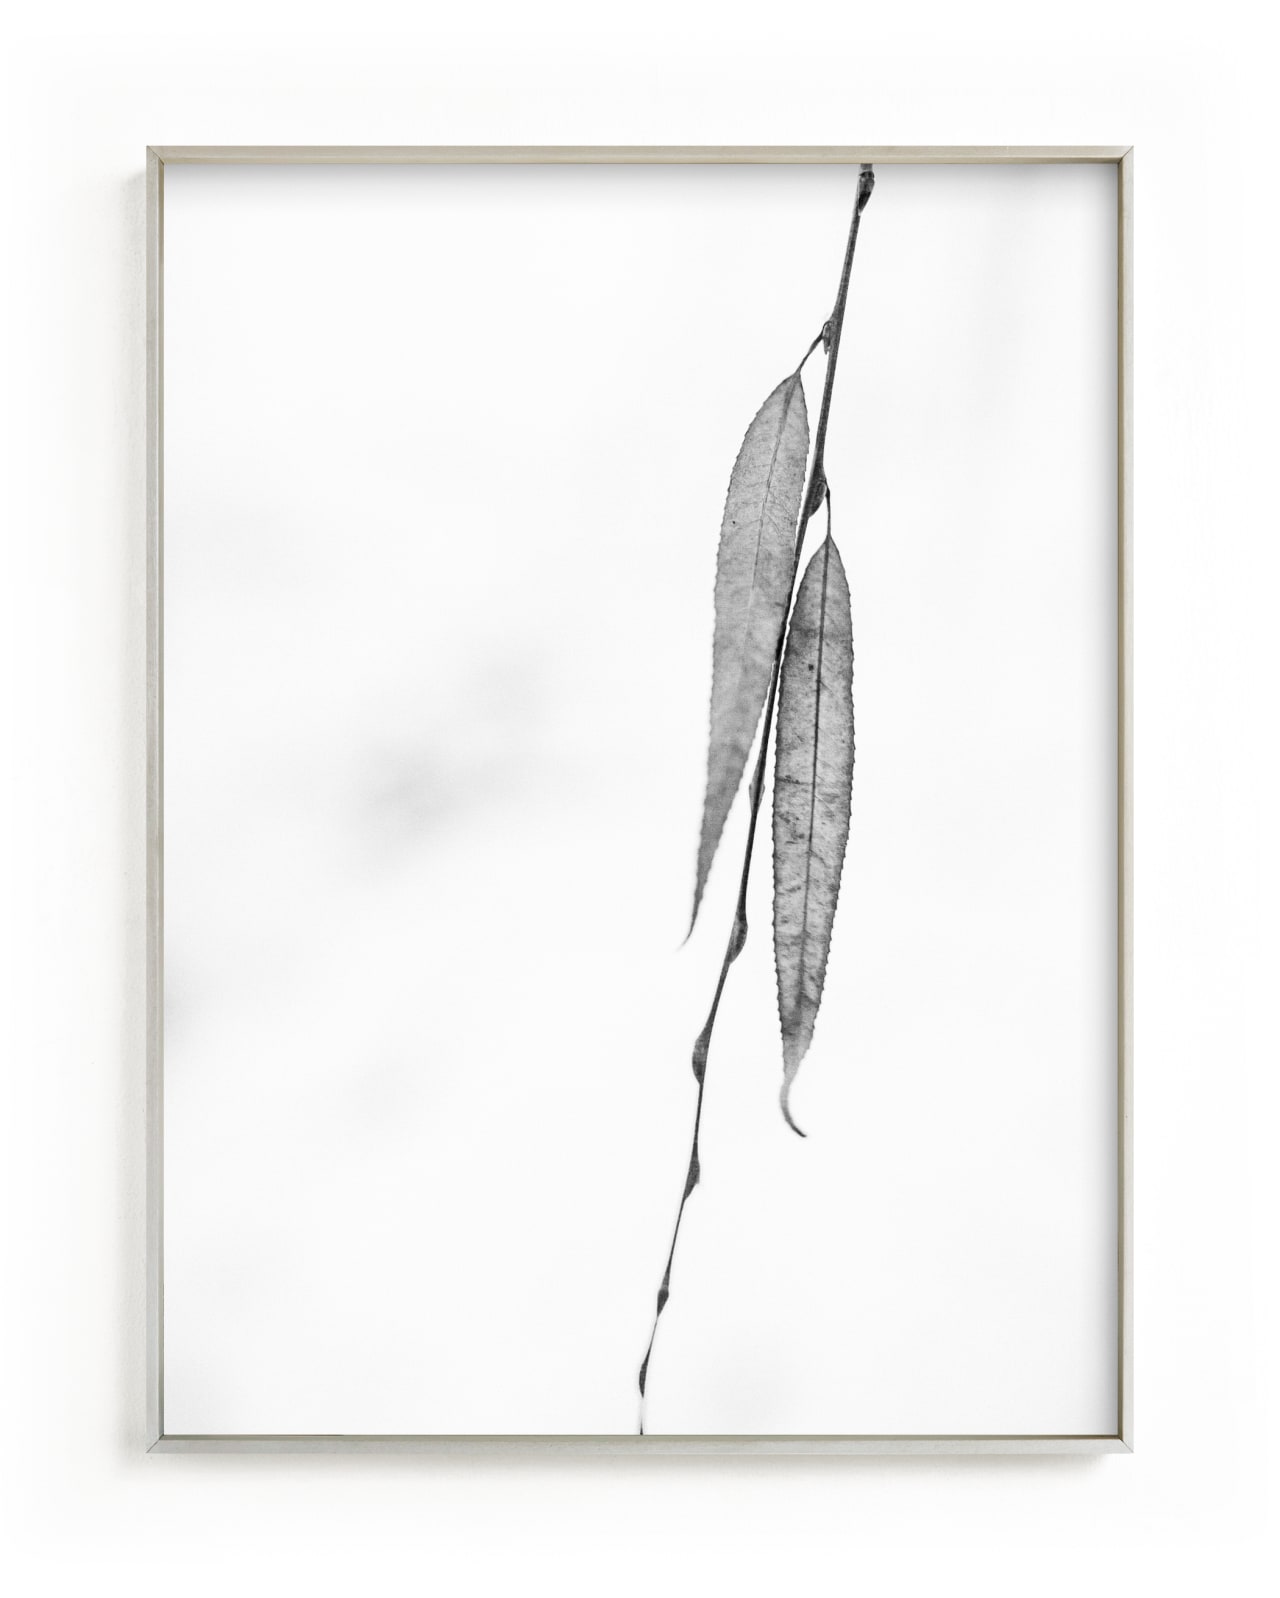 " Closer III" by Lying on the grass in beautiful frame options and a variety of sizes.